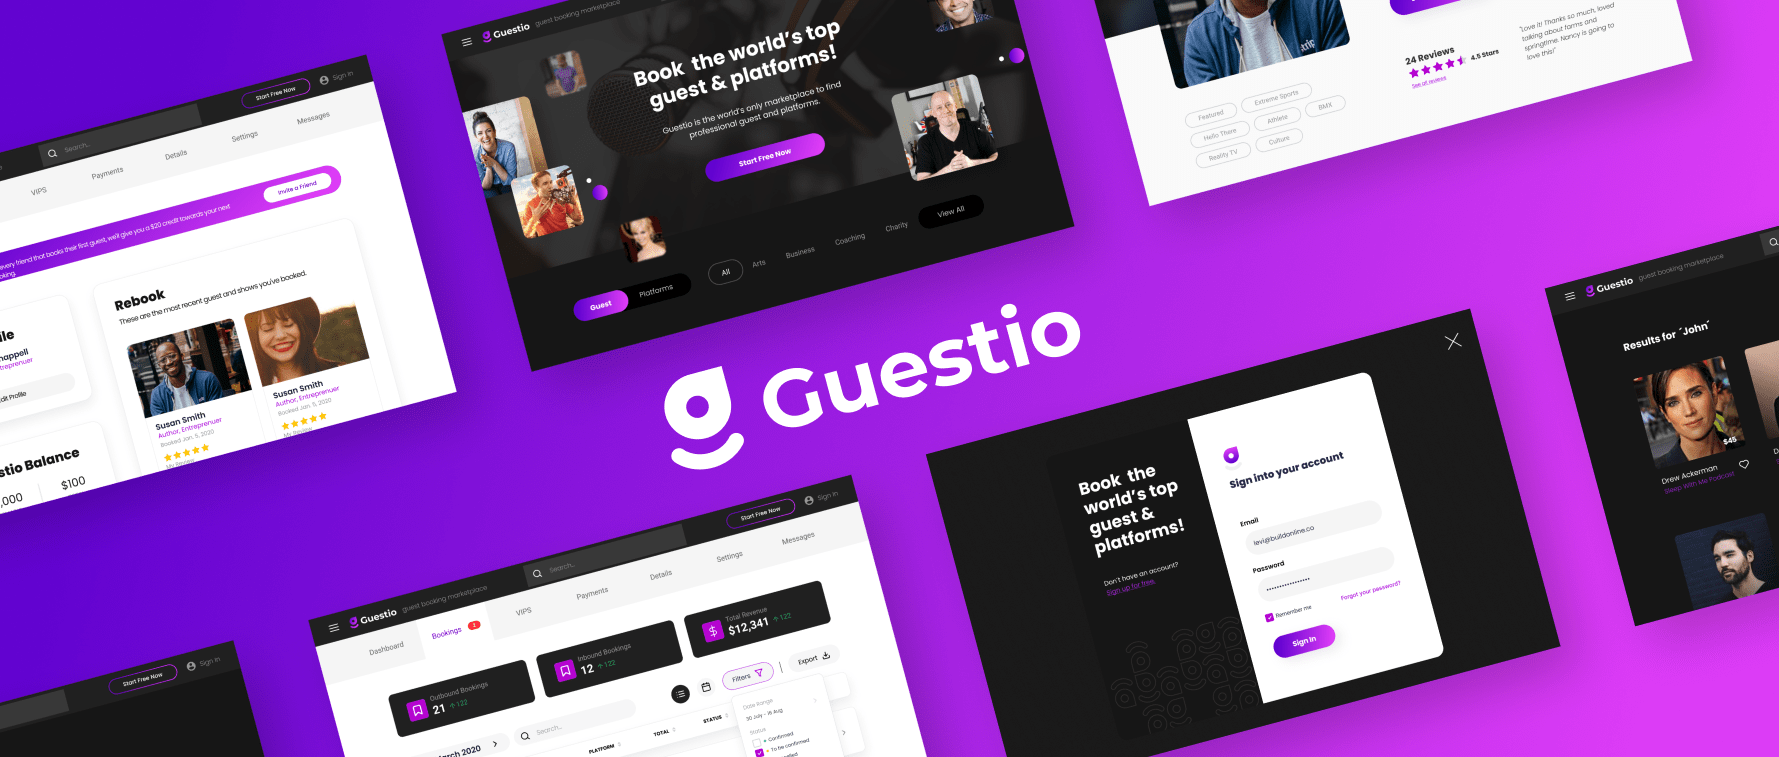 Guestio is LIVE!!!